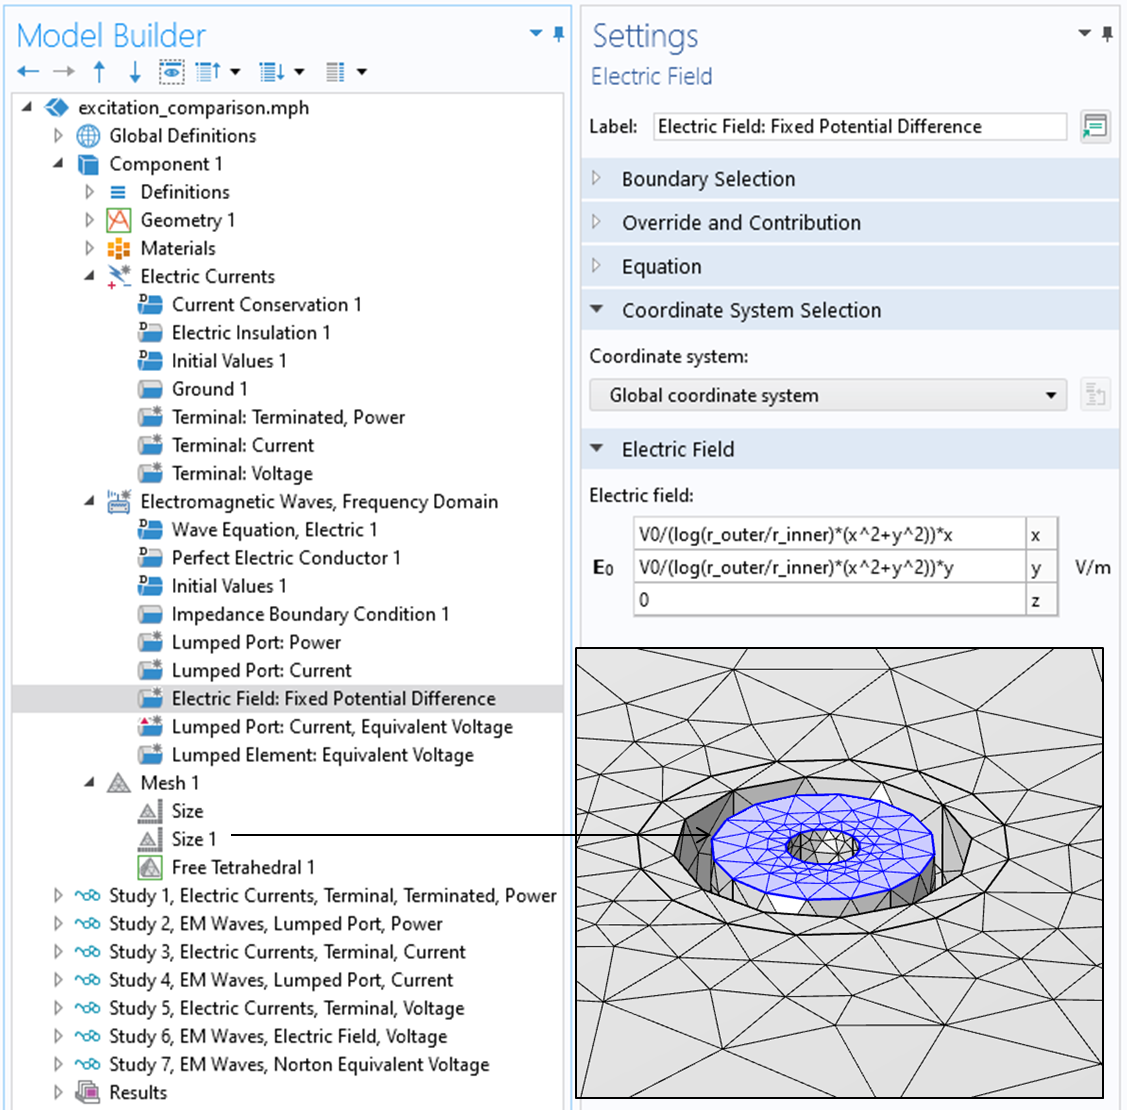 A close-up view of the COMSOL Multiphysics UI showing the Model Builder with the Electric Field: Fixed Potential Difference highlighted and the corresponding Settings window with the Coordinate System Selection and Electric Field section expanded.